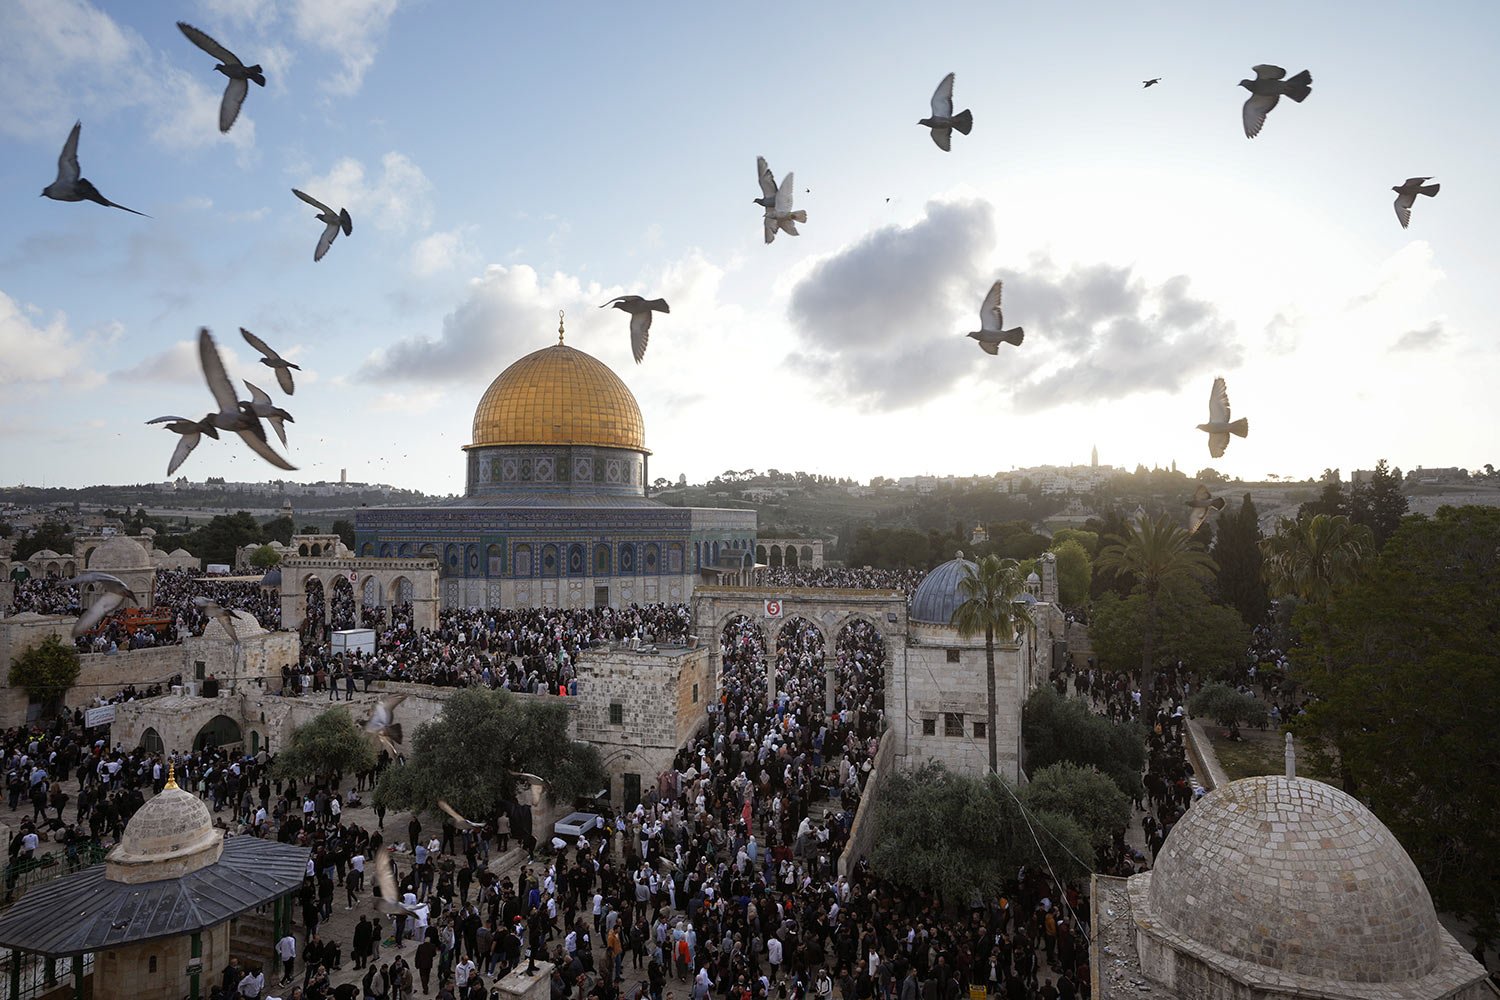  Palestinians attend Eid al-Fitr holiday celebrations by the Dome of the Rock shrine in the Al Aqsa Mosque compound in Jerusalem's Old City, Friday, April 21, 2023.  (AP Photo/Mahmoud Illean) 